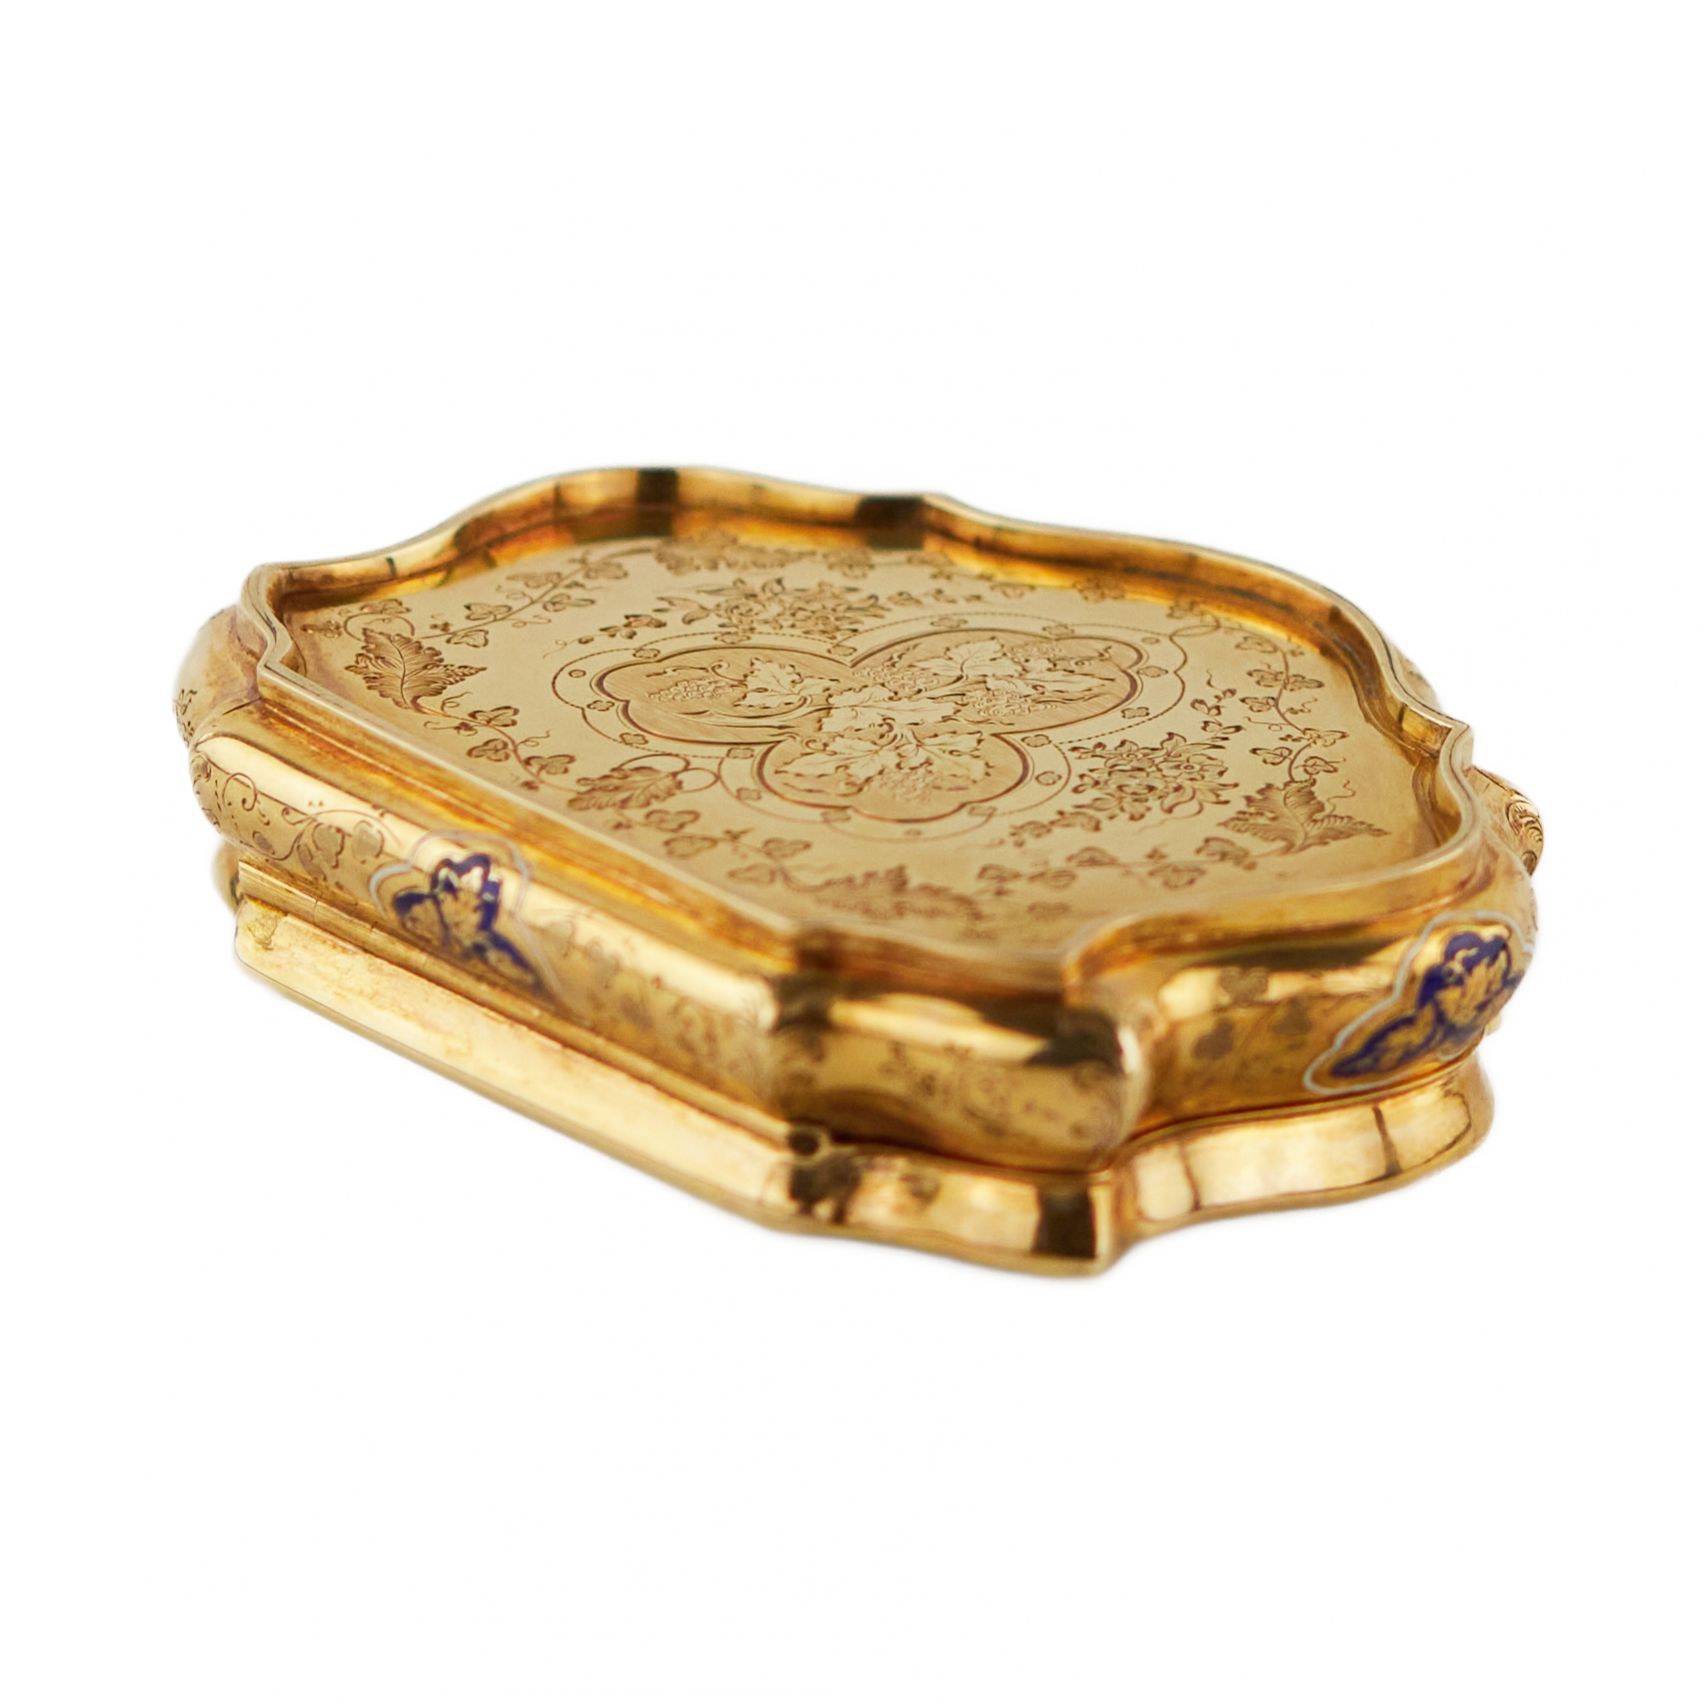 Gold snuff box with engraved ornament and blue enamel. 20th century. - Image 9 of 10